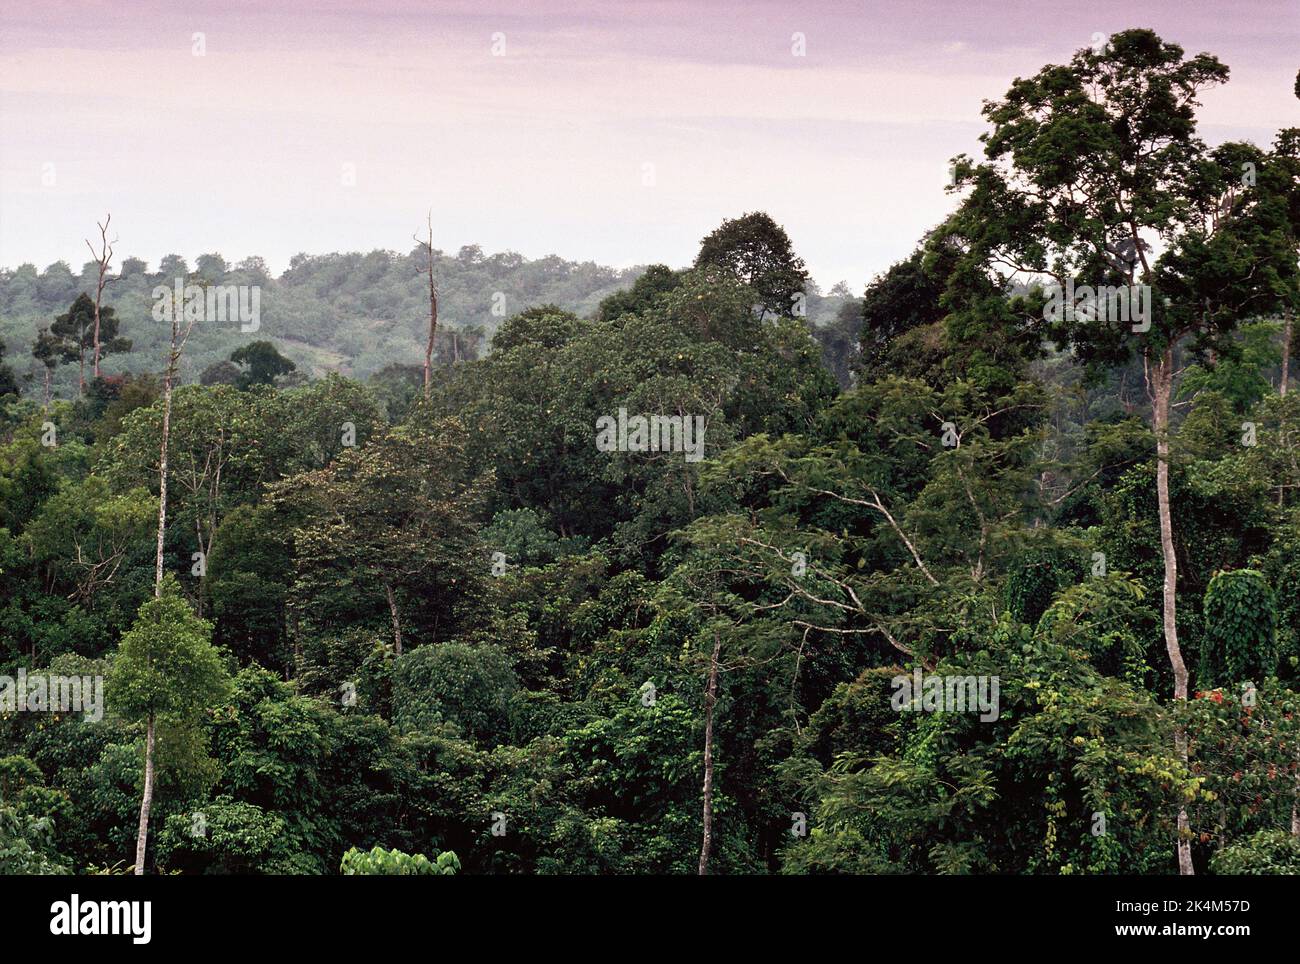 Malaysia. Sabah. Rainforest view with oil palm plantation in background. Stock Photo